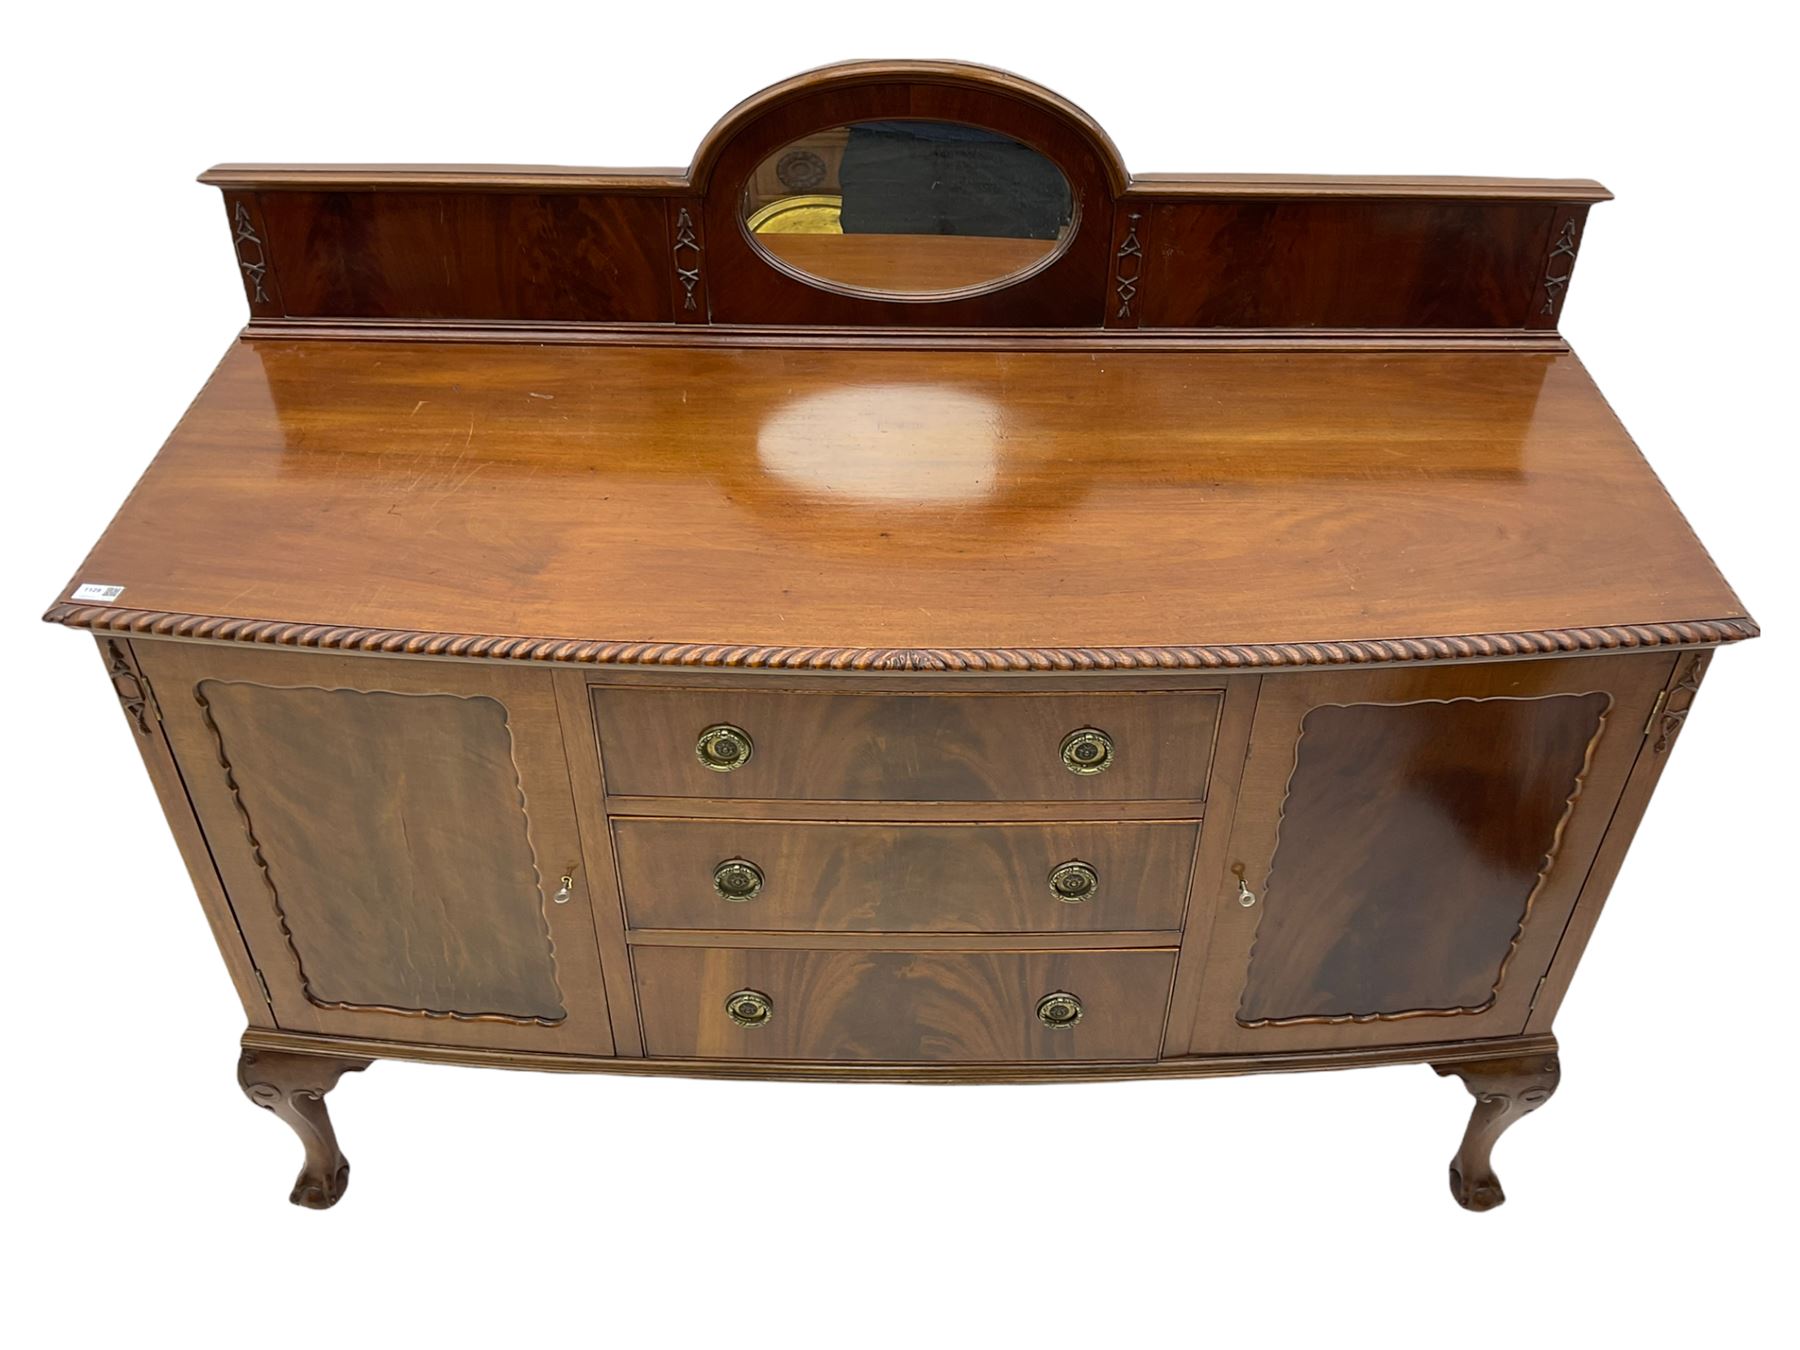 Early 20th century mahogany bow-fronted sideboard - Image 5 of 8